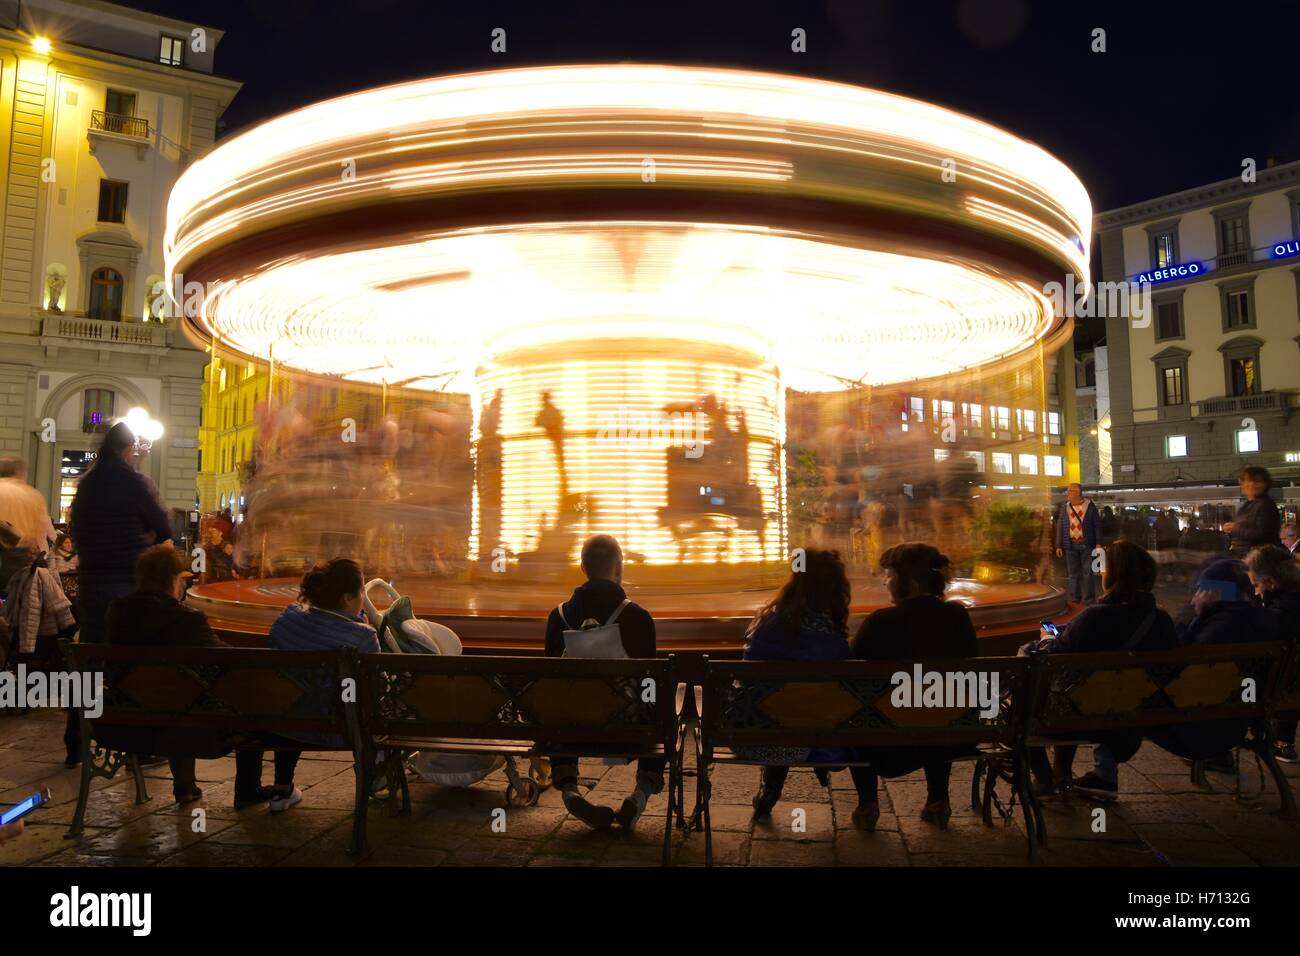 Merry-go-round photographed in the evening, with a slow shutter speed, on the Piazza della Republica, Florence, Tuscany, Italy. Stock Photo